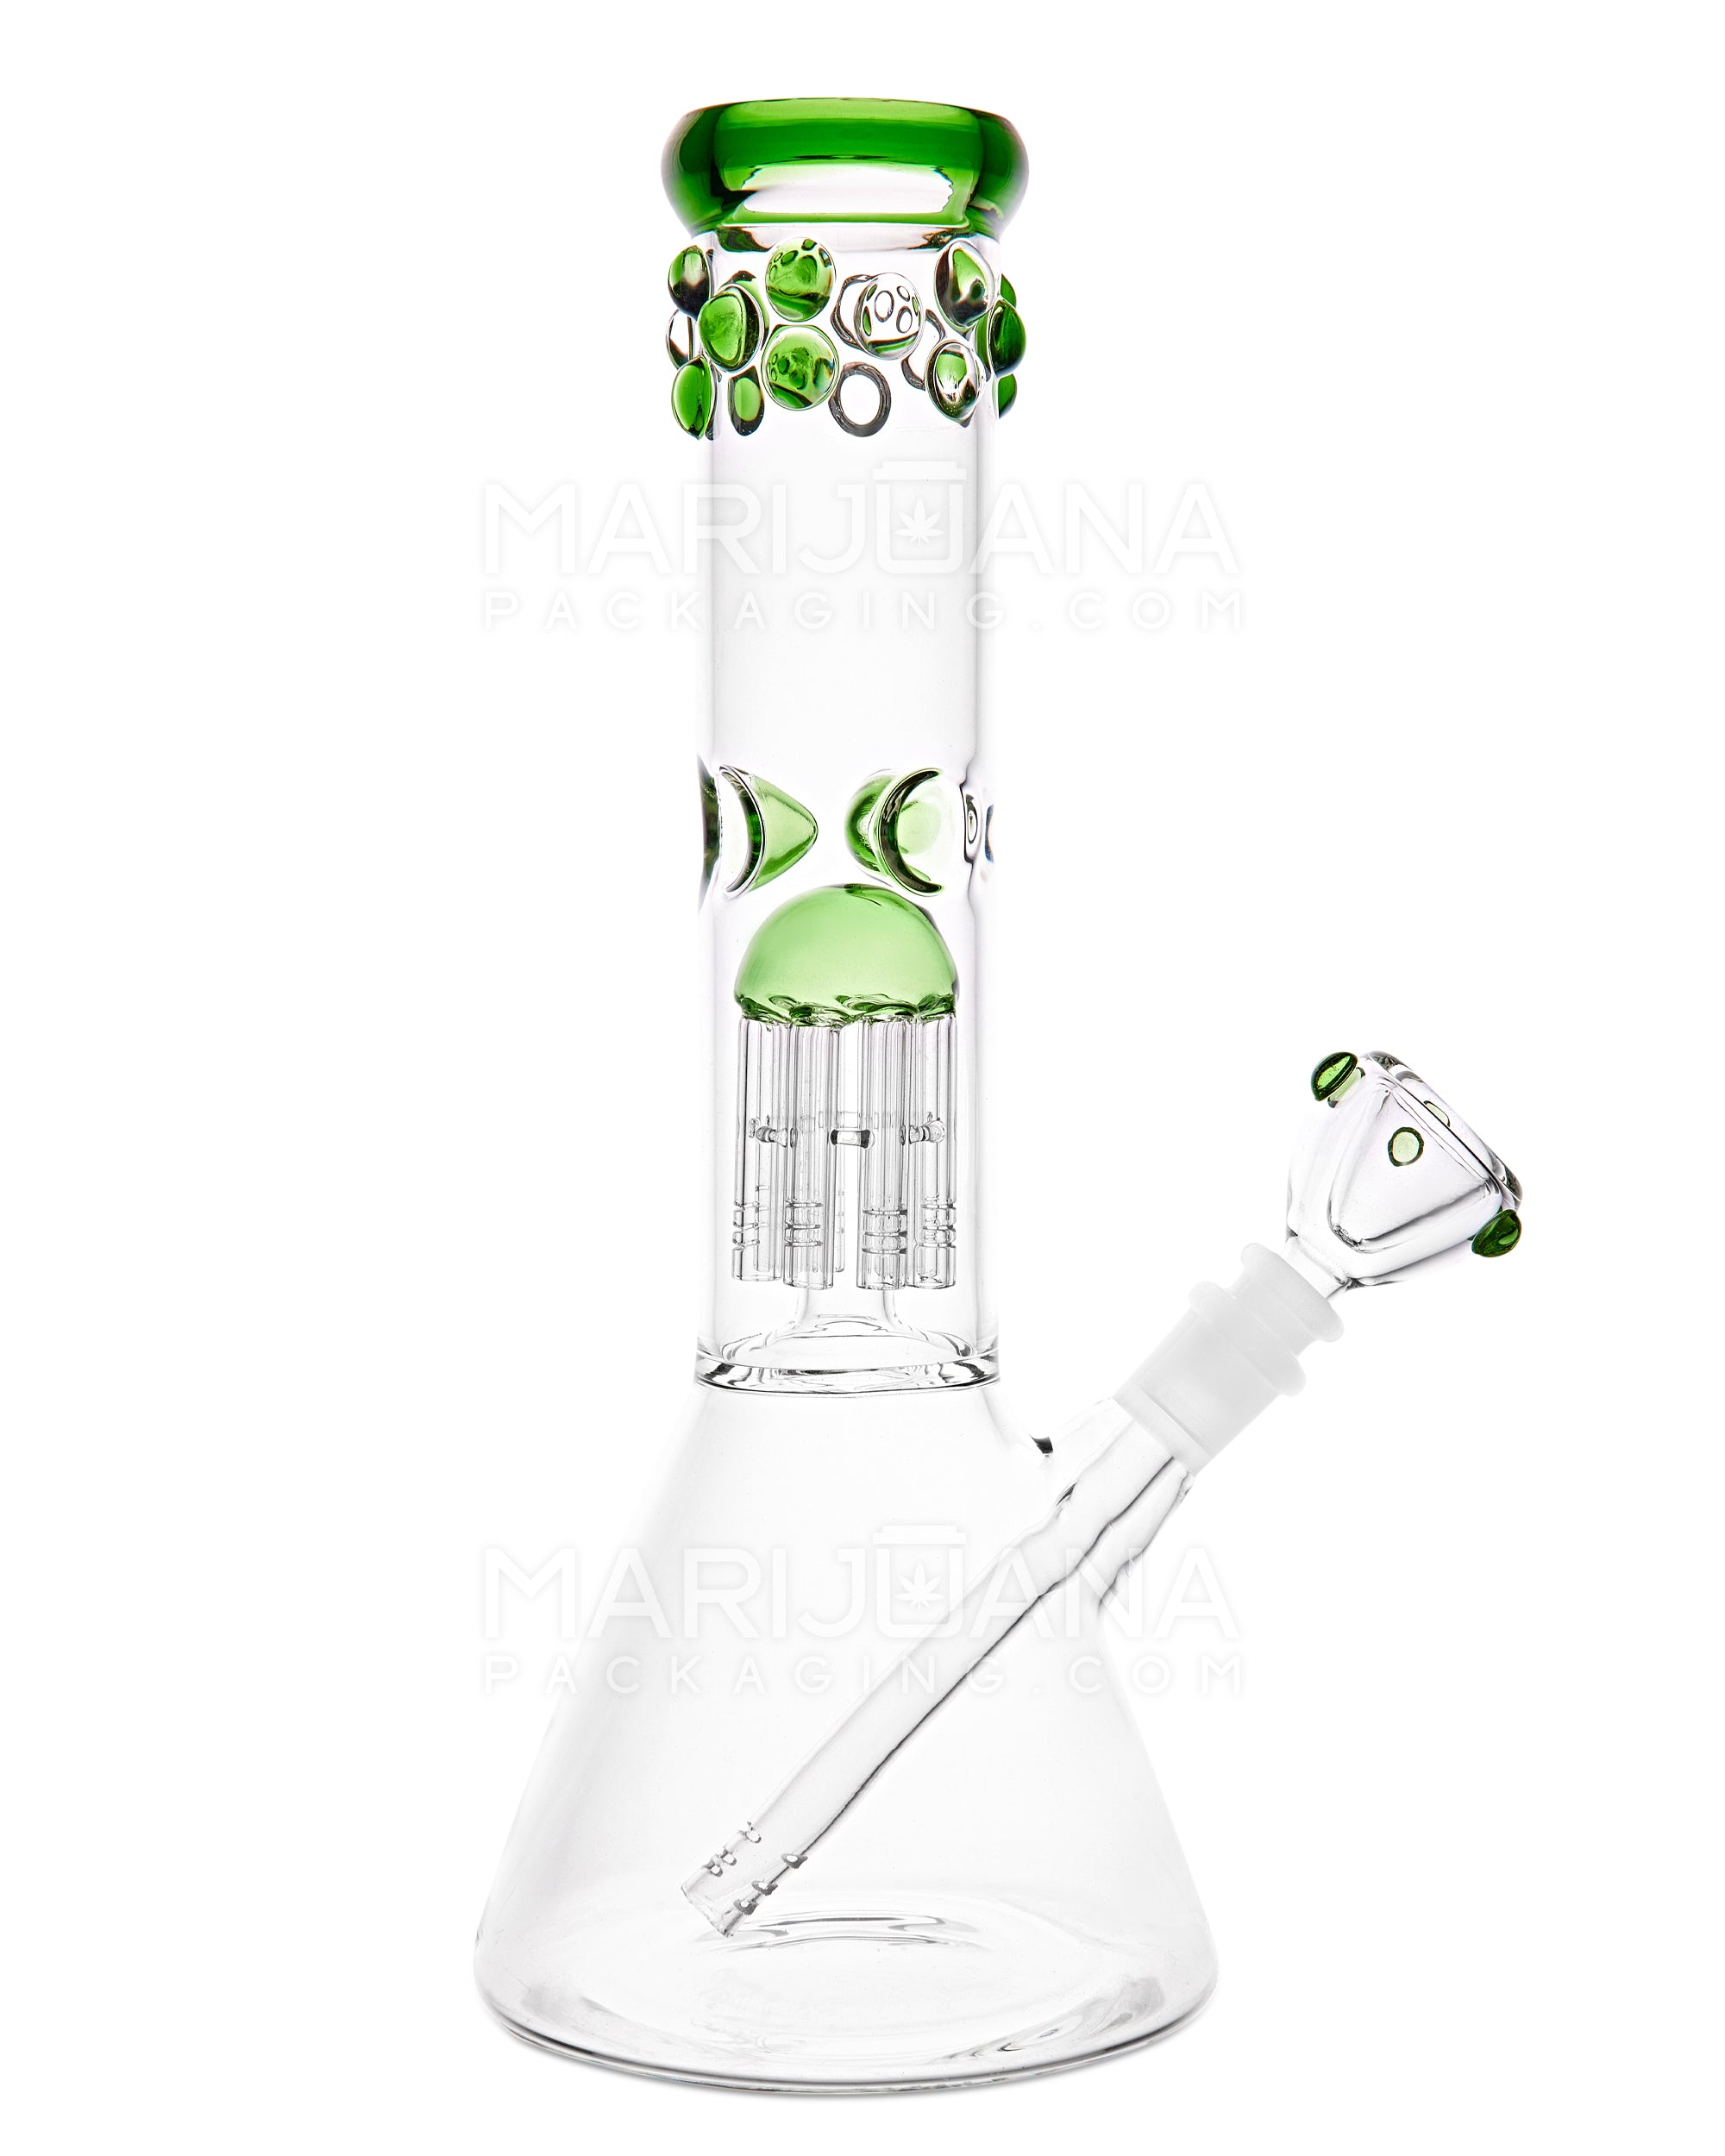 Straight Neck Tree Perc Thick Glass Beaker Water Pipe w/ Ice Catcher | 12in Tall - 14mm Bowl - Green - 1